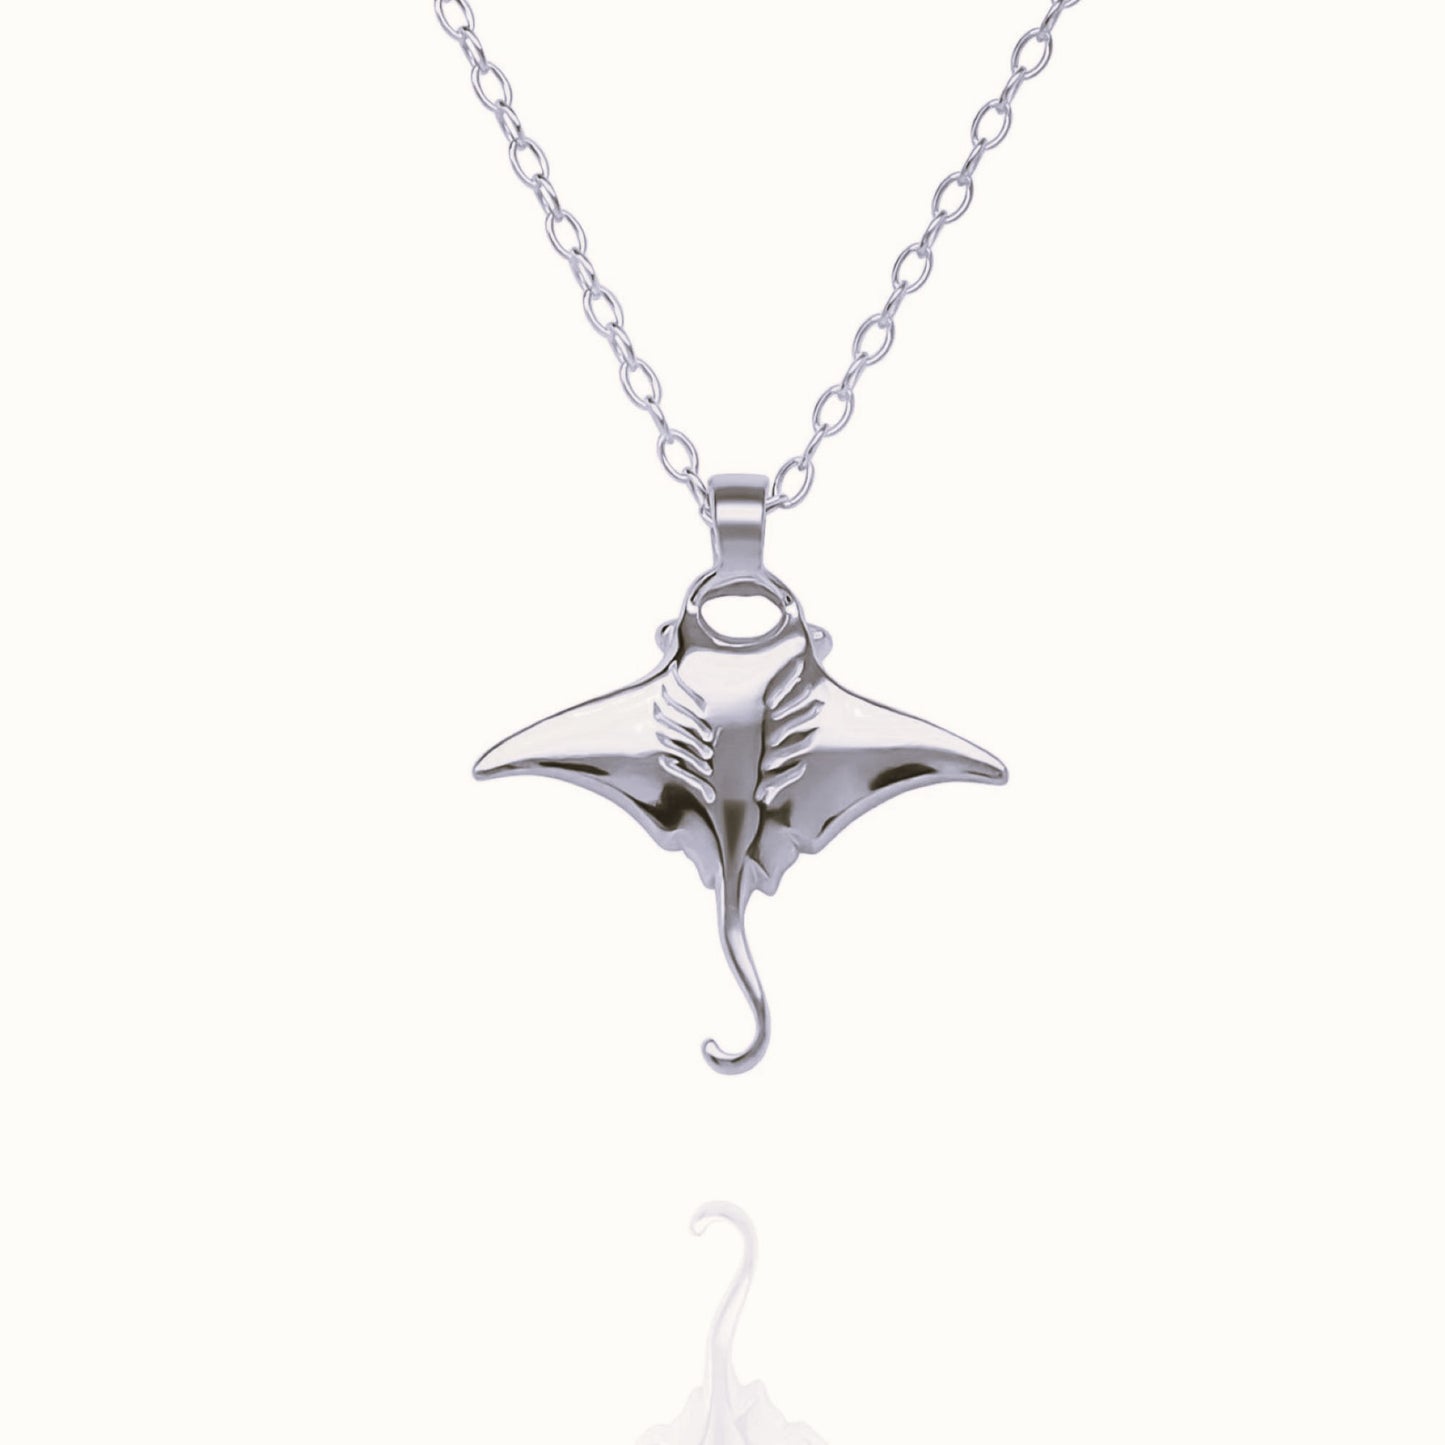 Platinum Manta Ray charm with a solid platinum chain. Made to order. © Adrian Ashley